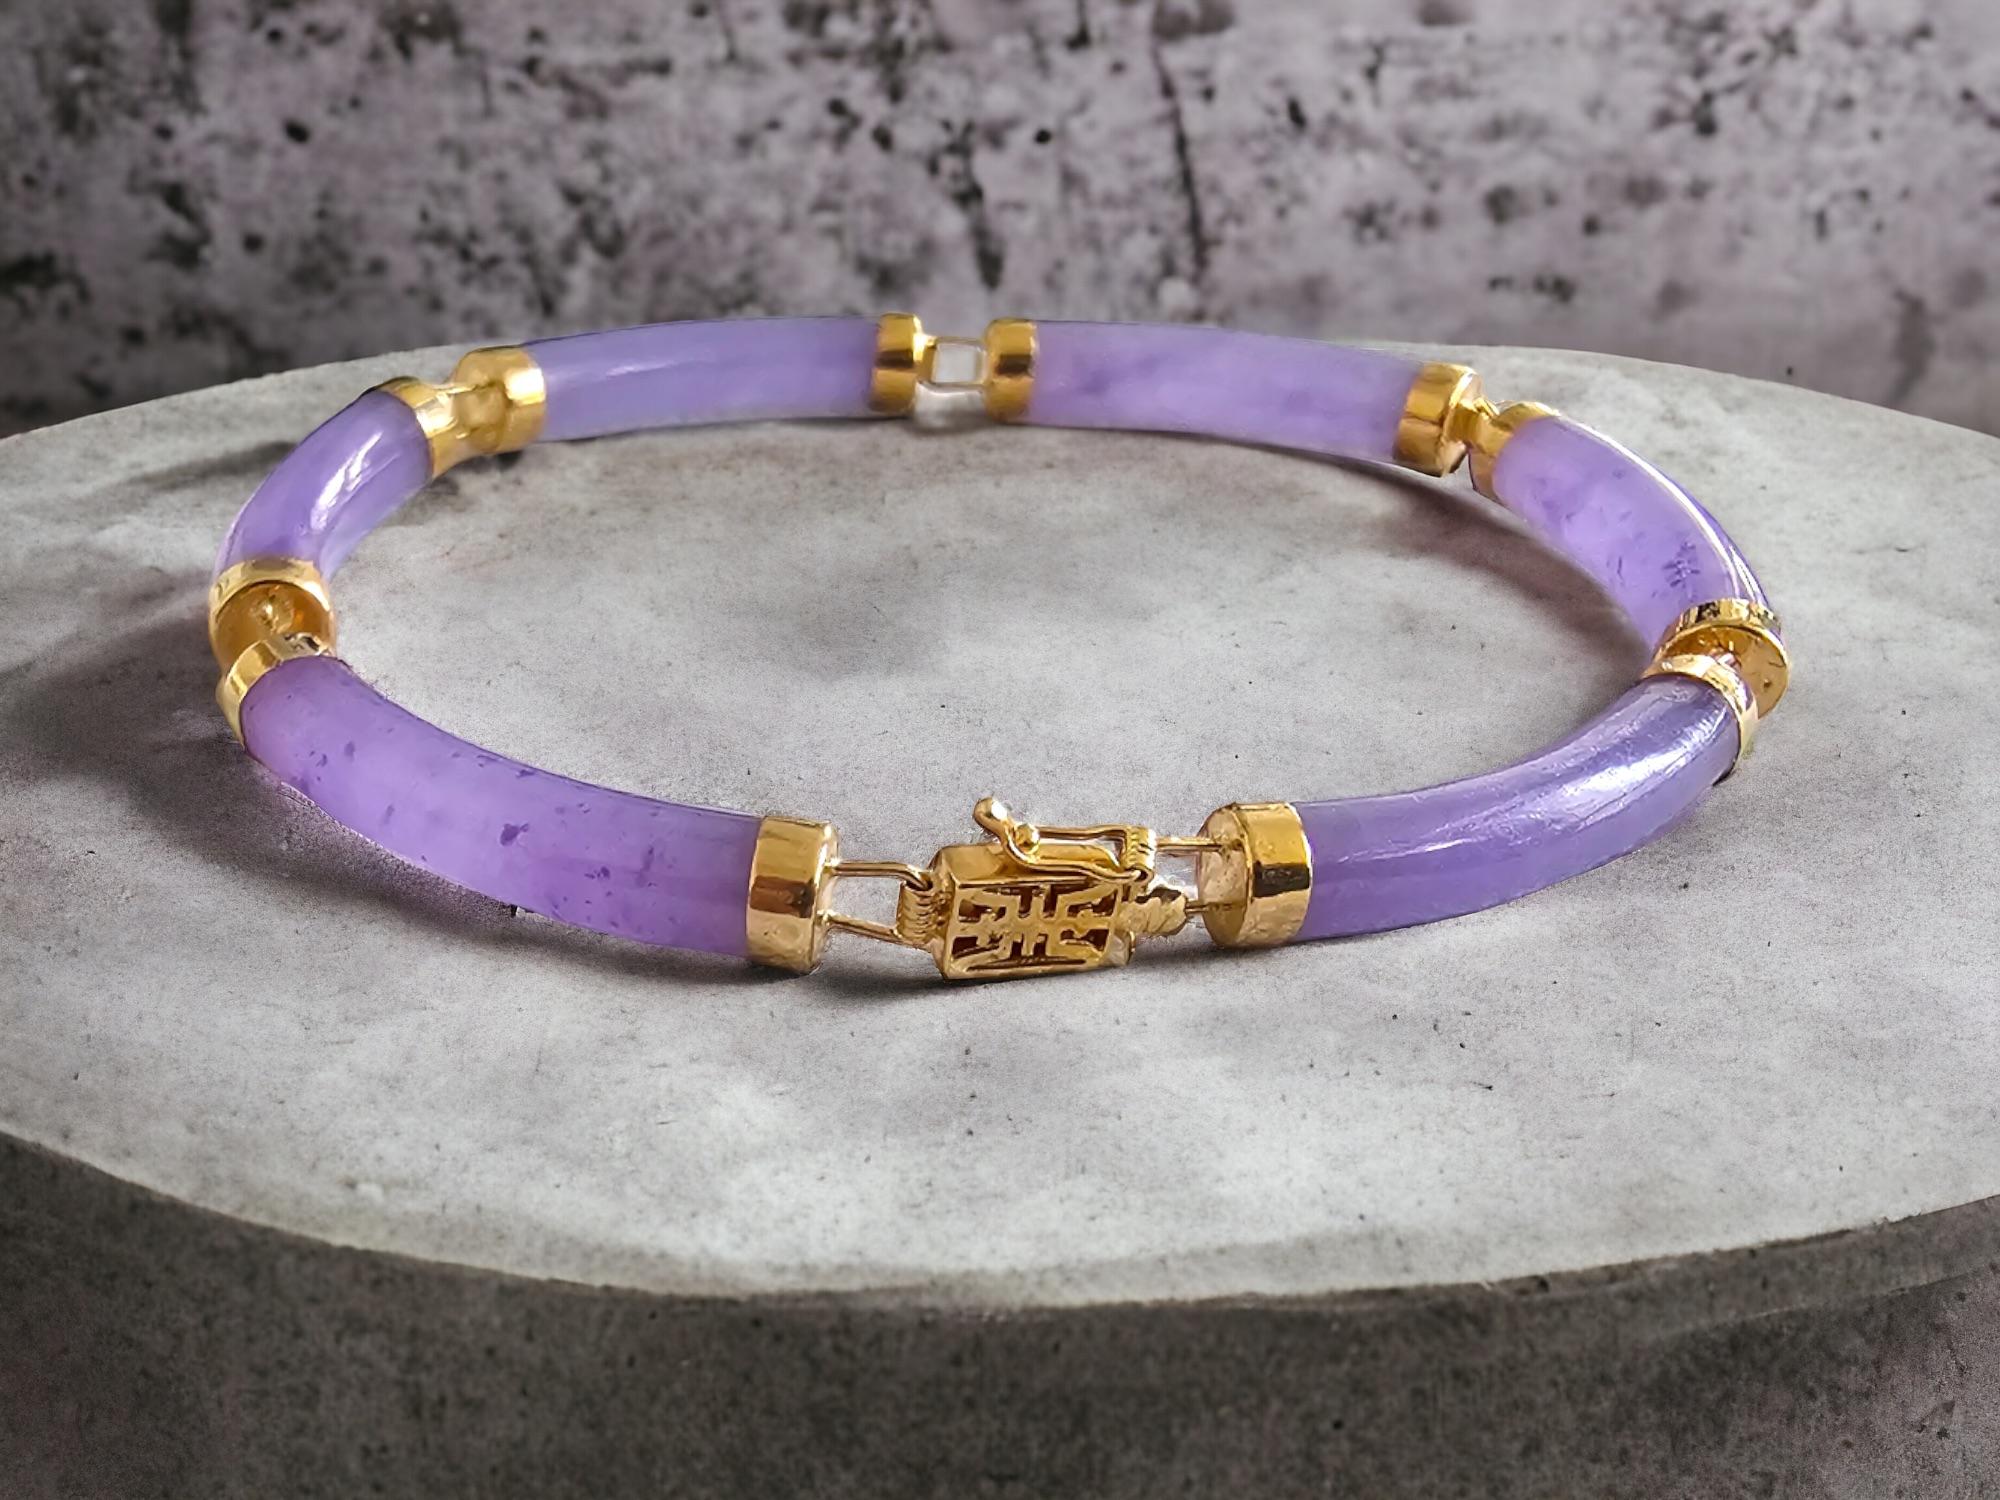 Fortune Purple Jade Tube Bars Bracelet with 14K Solid Yellow Gold links and clasp

The ‘Fu Fuku Fortune Jade’ Bracelet uses ancient oriental techniques to create a cylindrical design. Easy-to-wear, yet weighted. Our best-selling Bracelet, perfect